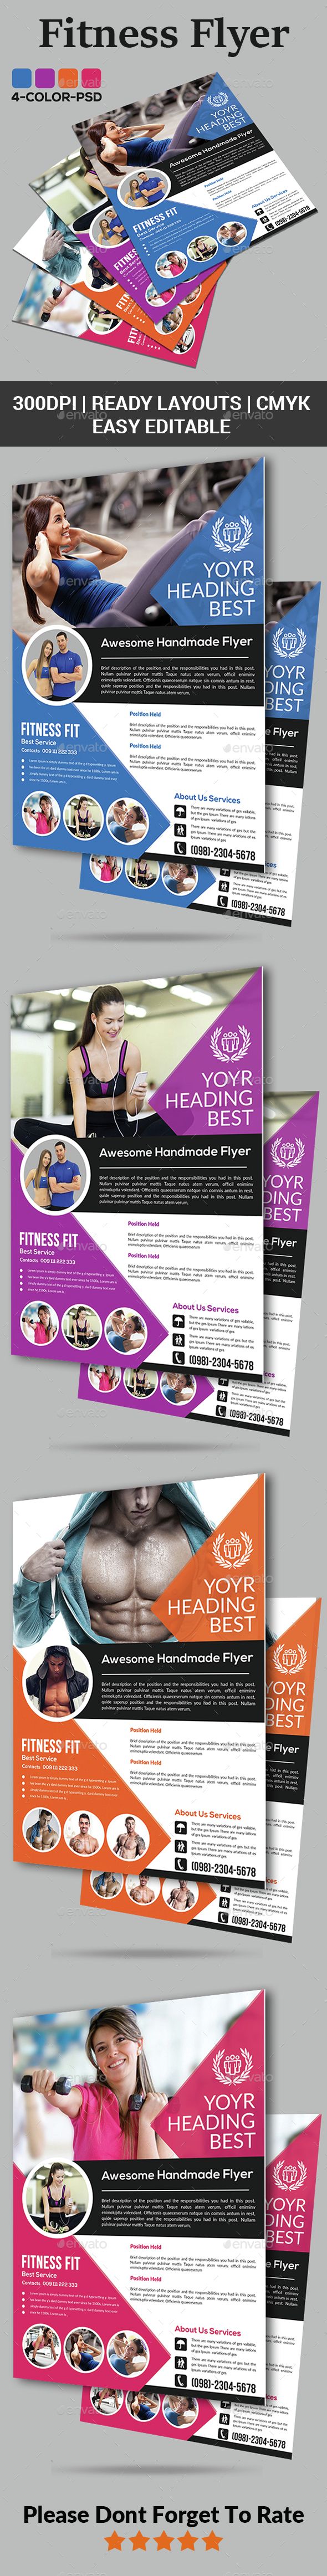 Healthcare-Advertising-Fitness-Flyer-Template-PSD.-Download-here-graphicriver.net Healthcare Advertising : Fitness Flyer Template PSD. Download here: graphicriver.net/...